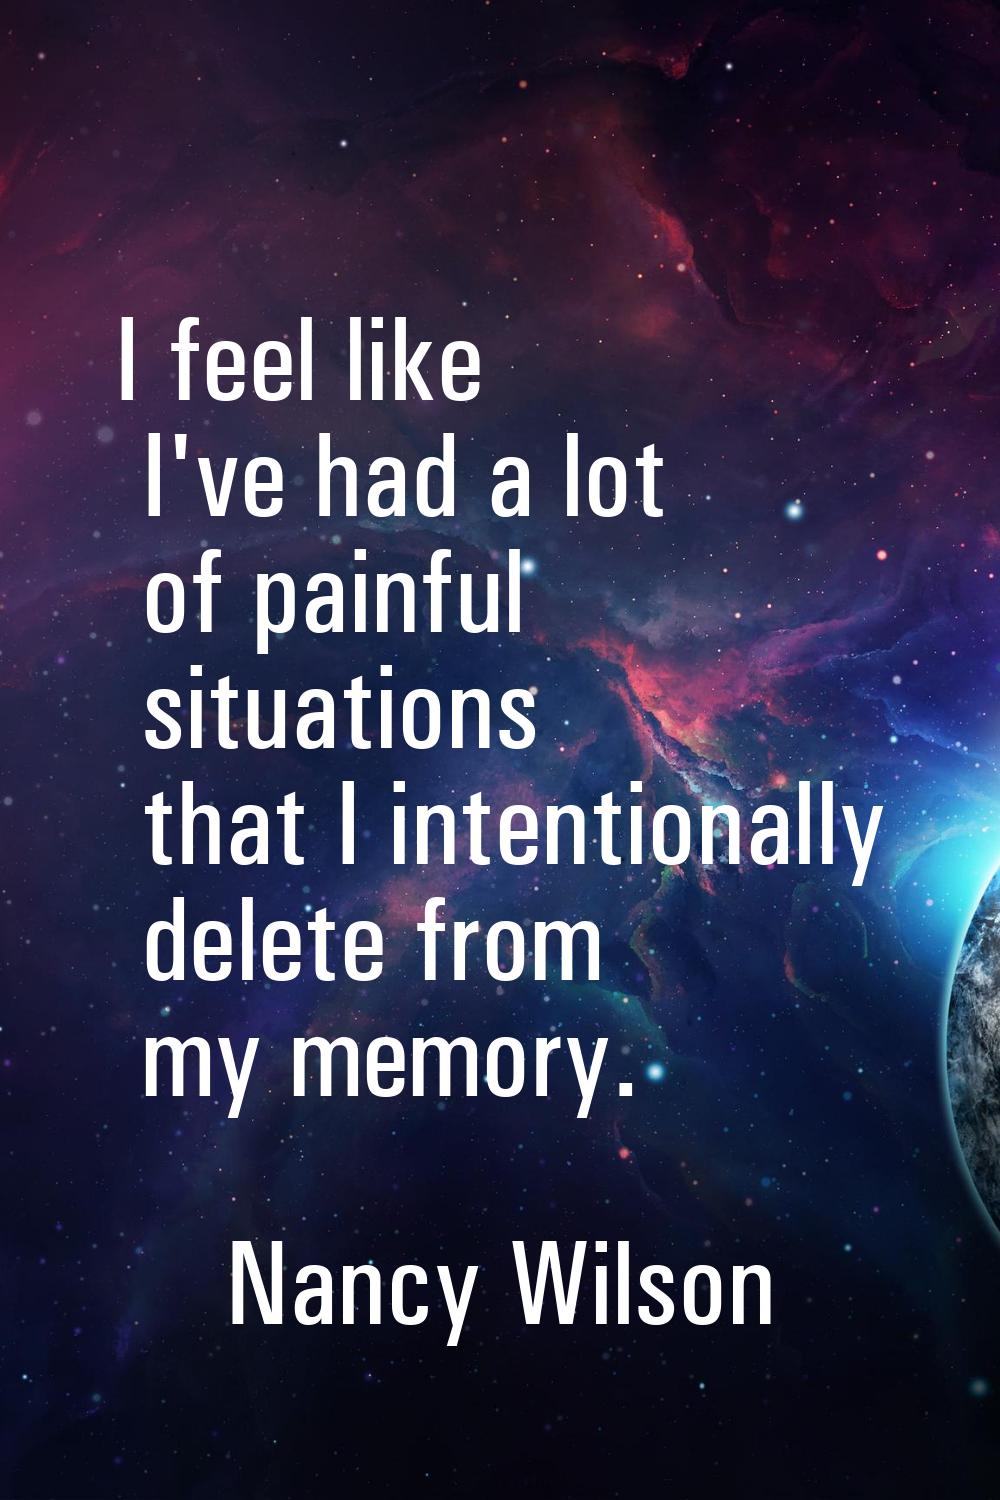 I feel like I've had a lot of painful situations that I intentionally delete from my memory.